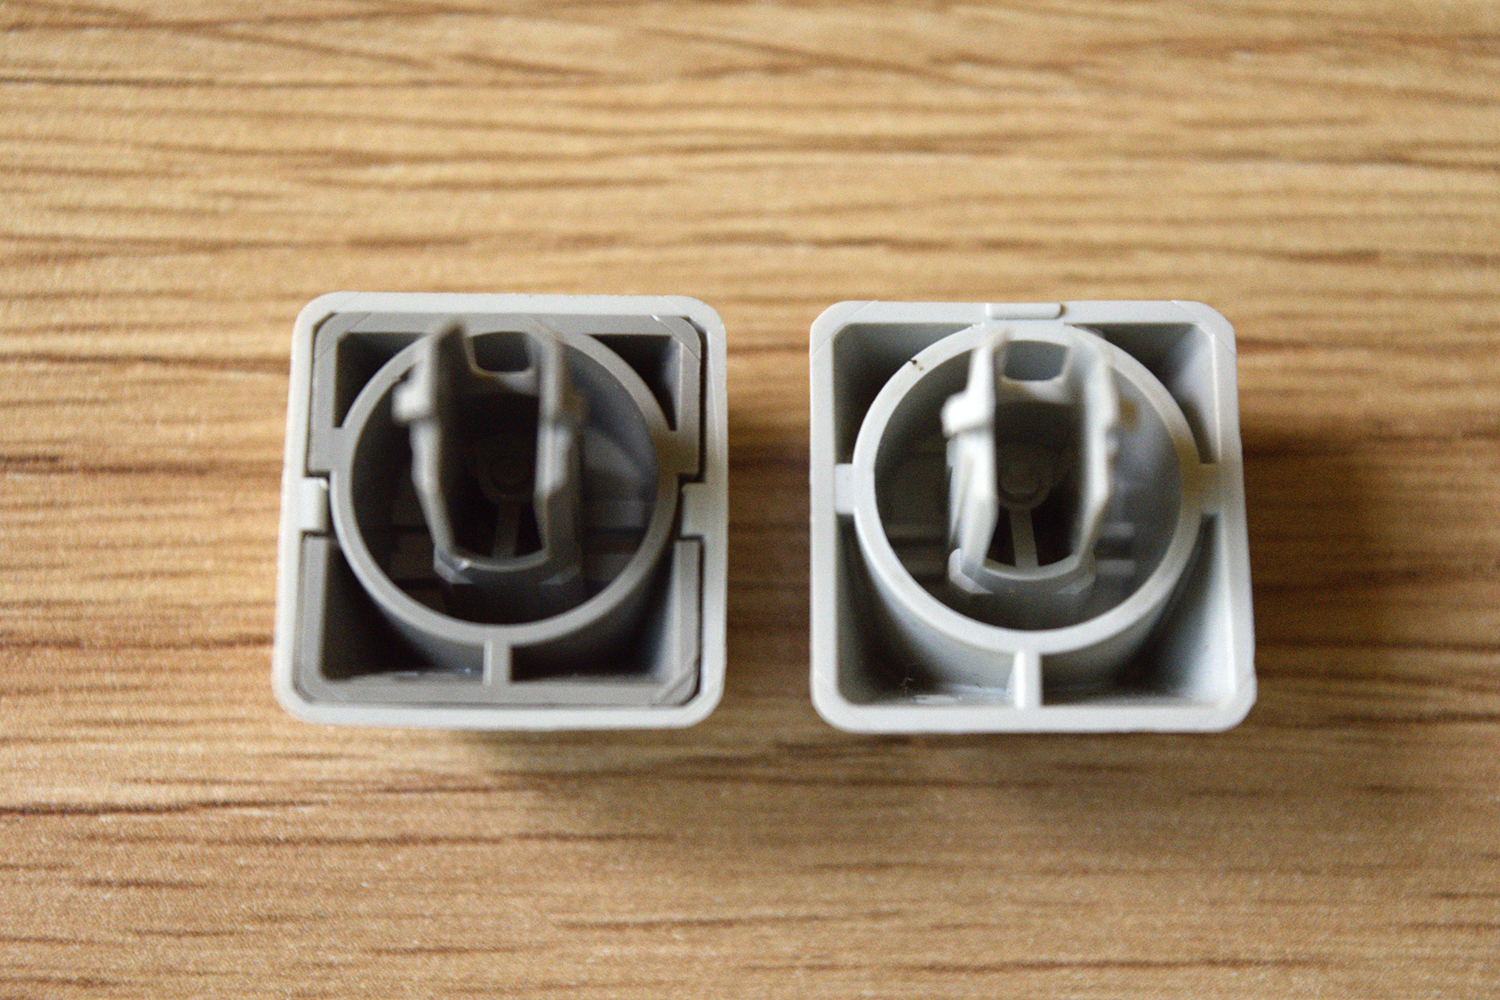 IBM 95 -- Comparison of key bottoms (Left to right): IBM Model M 1390120, IBM 95.  The sprue for the 95's keycaps is underneath the cap and not on the back.